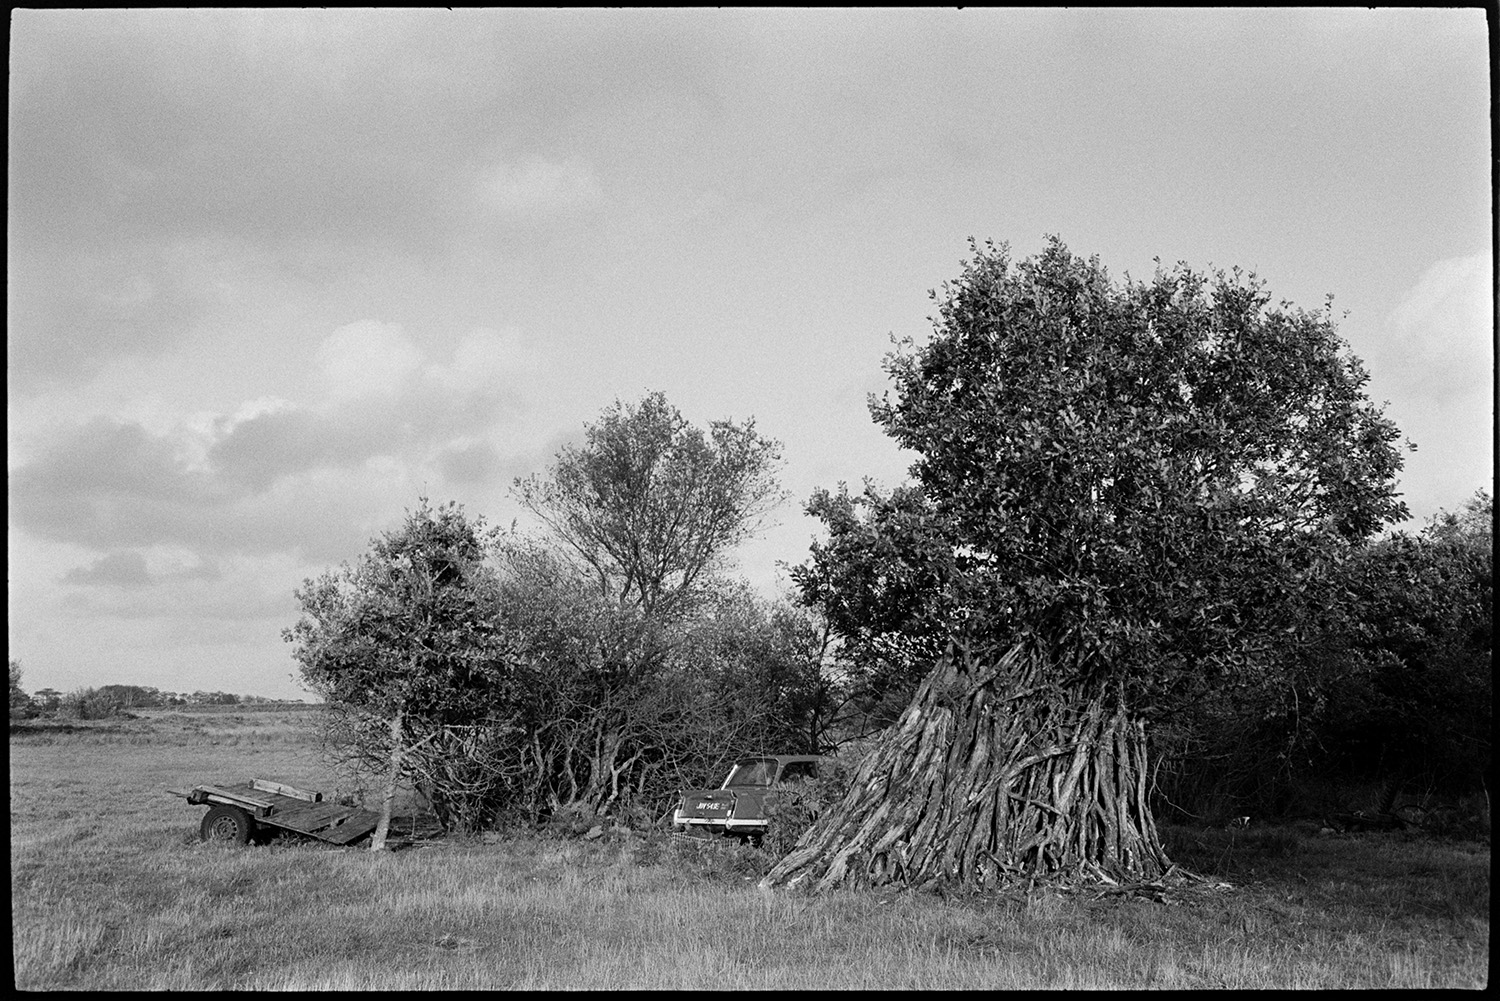 Woodpile in field behind farm.
[A woodpile of logs stacked by a tree in a field at Cupper's Piece, Beaford. A trailer and a car can also be seen by the trees.]